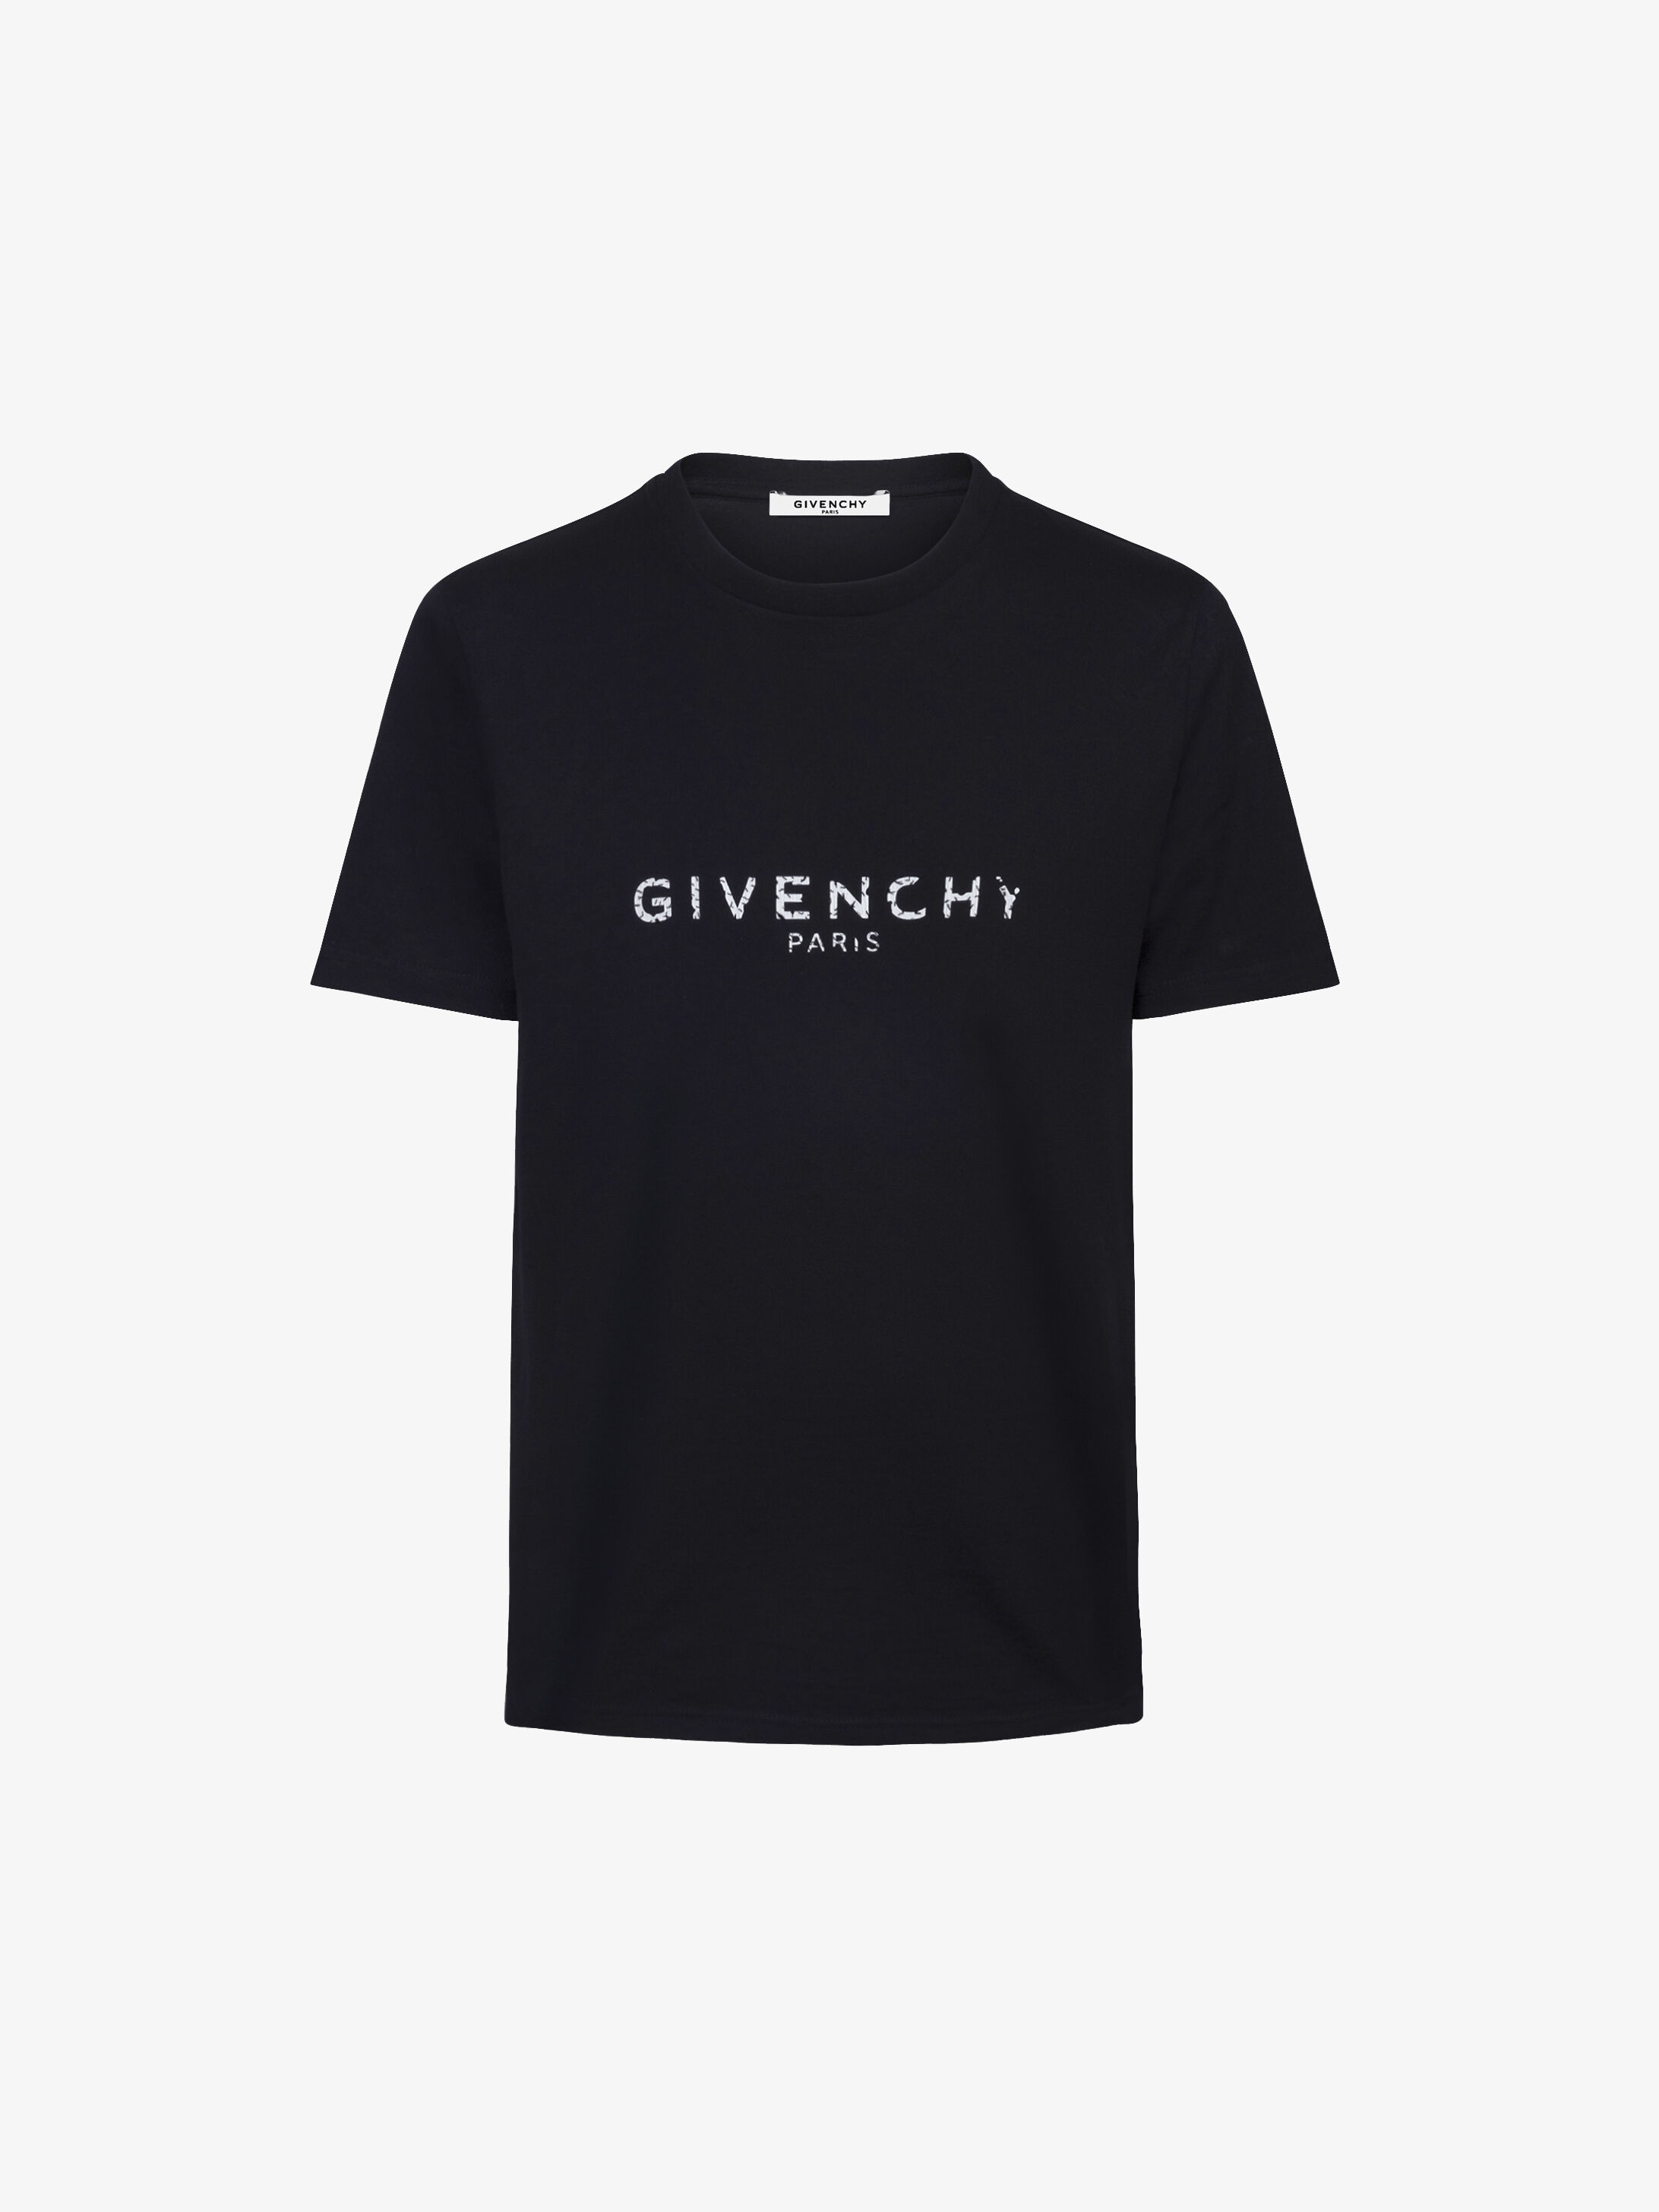 givenchy t shirt red writing